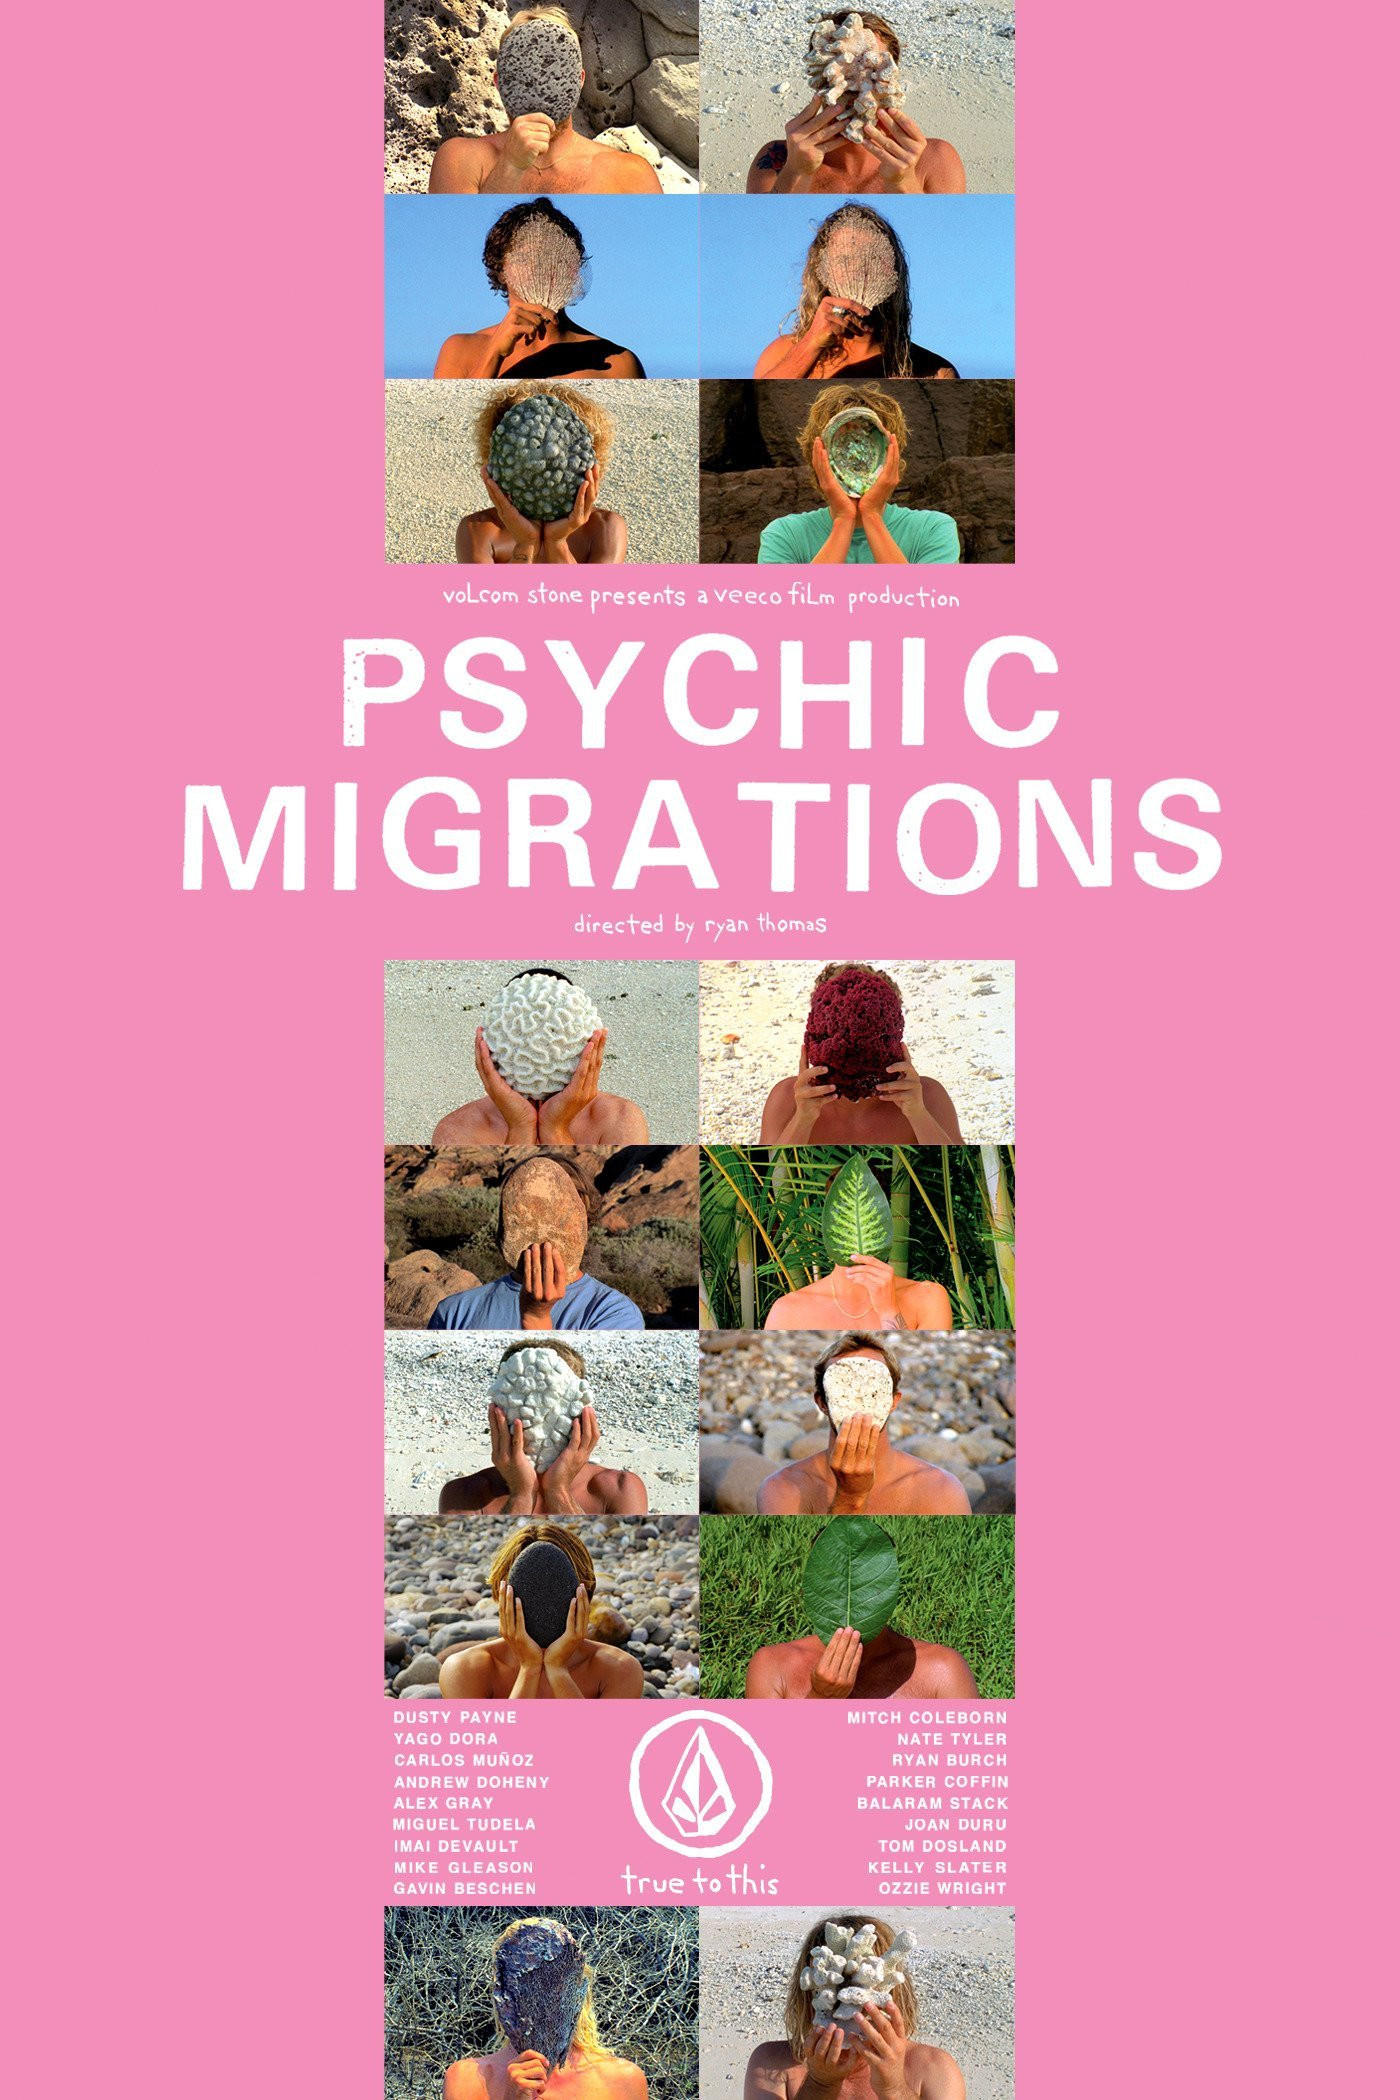 Psychic Migrations by Volcom